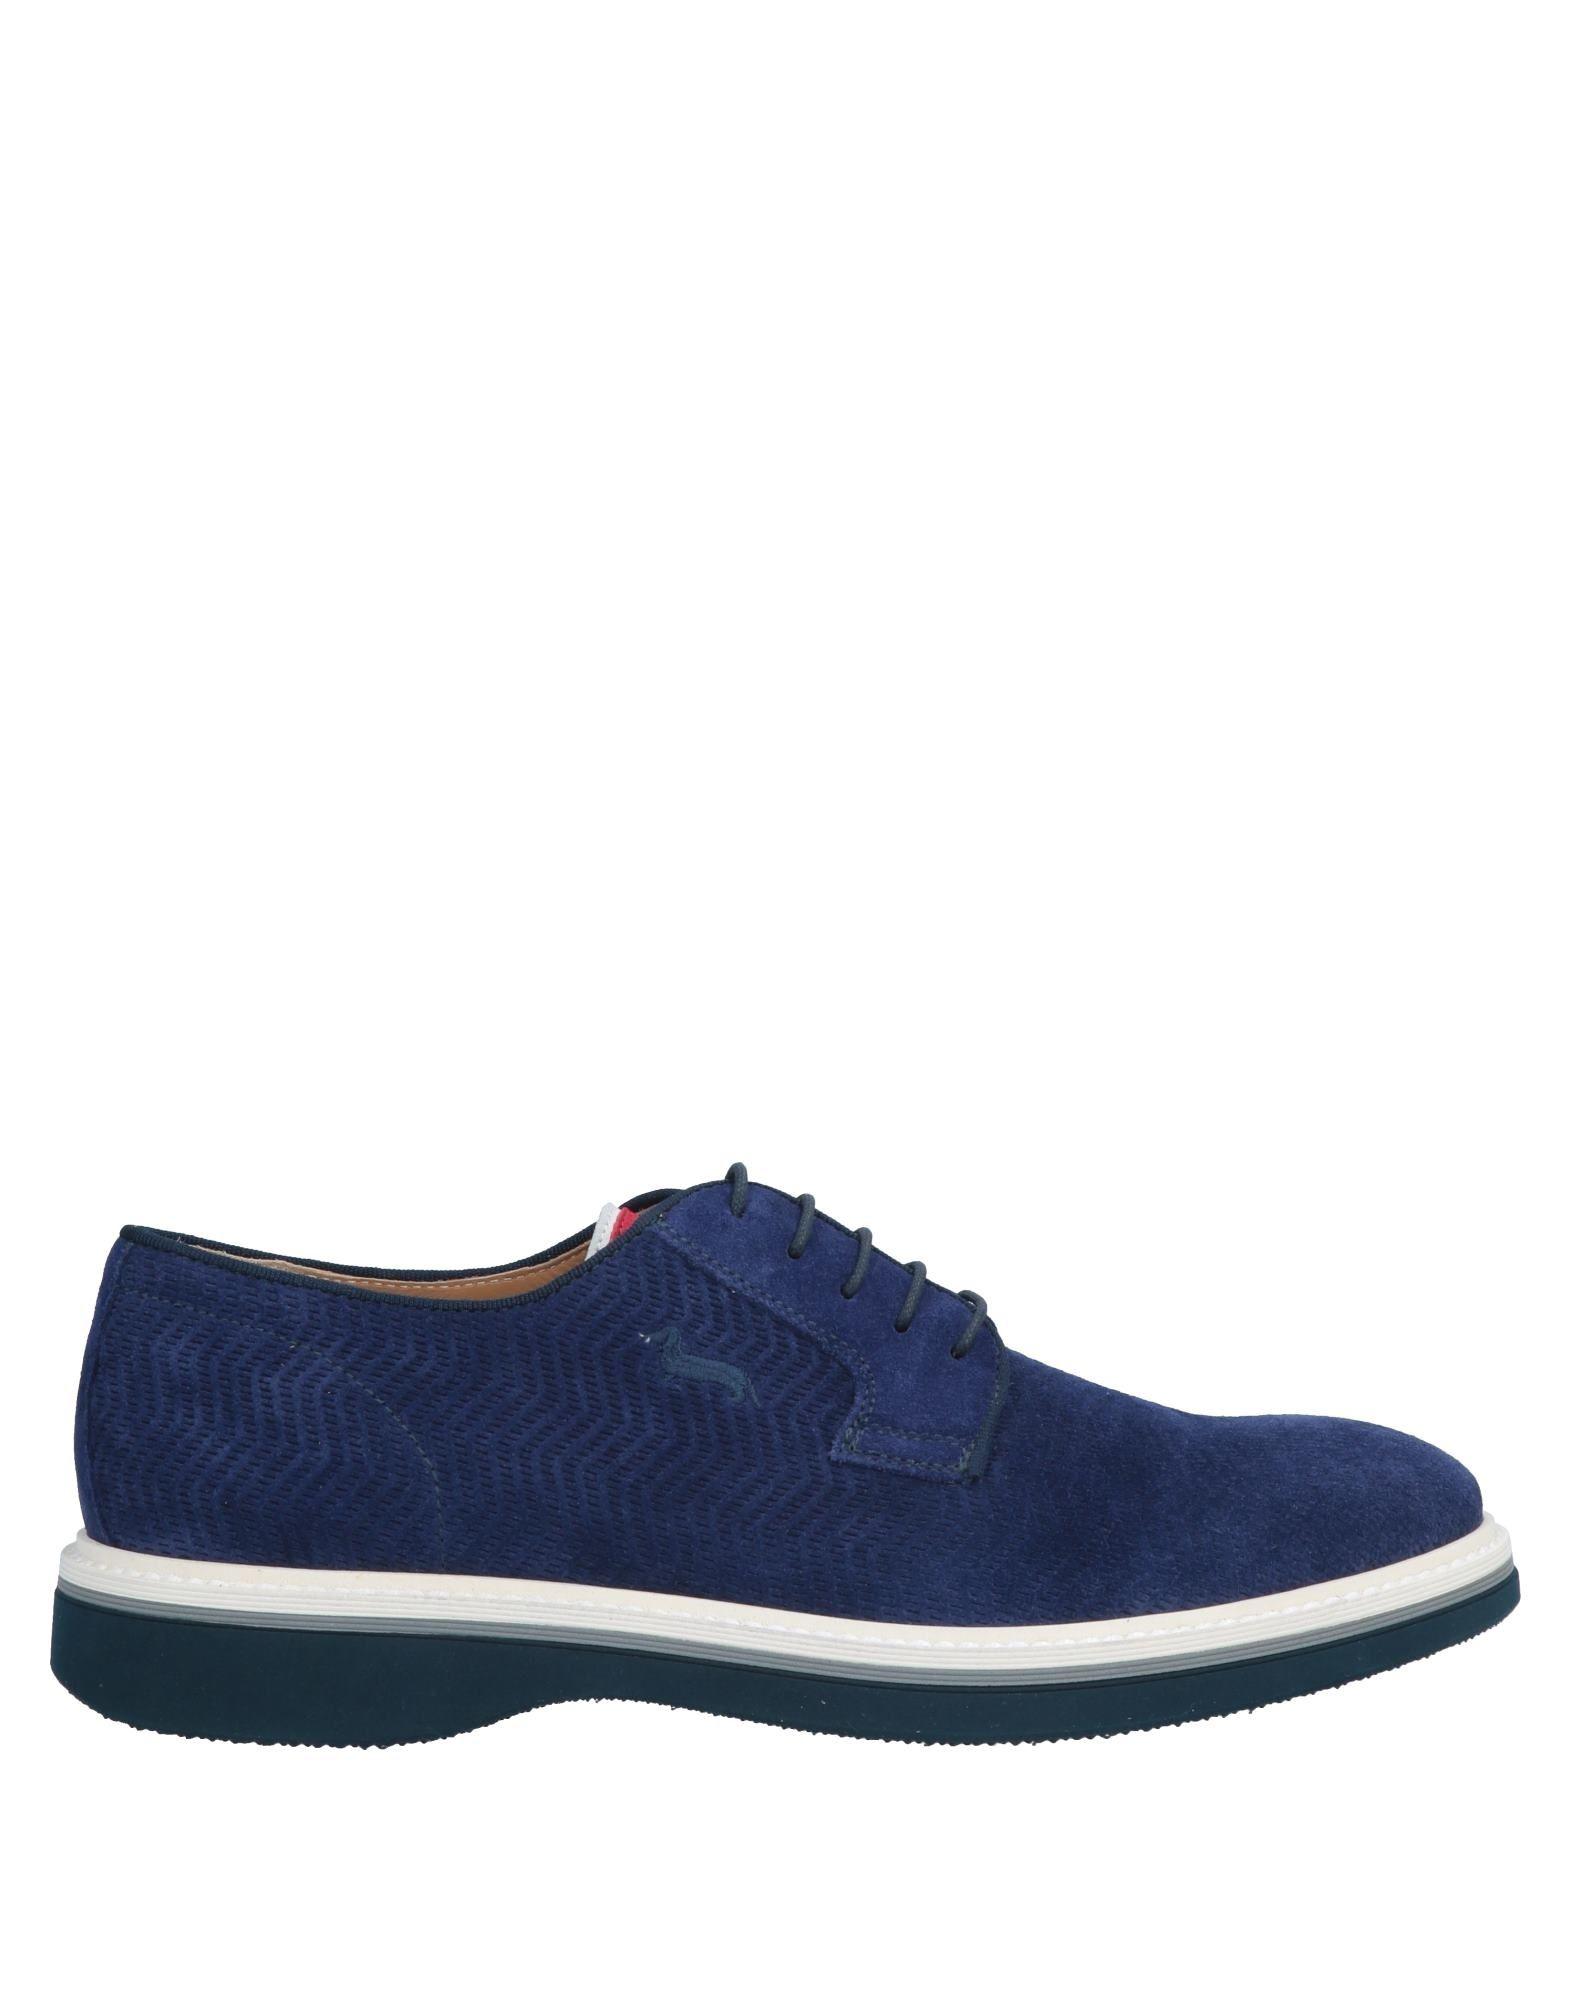 Harmont & Blaine Leather Lace-up Shoe in Blue for Men - Lyst